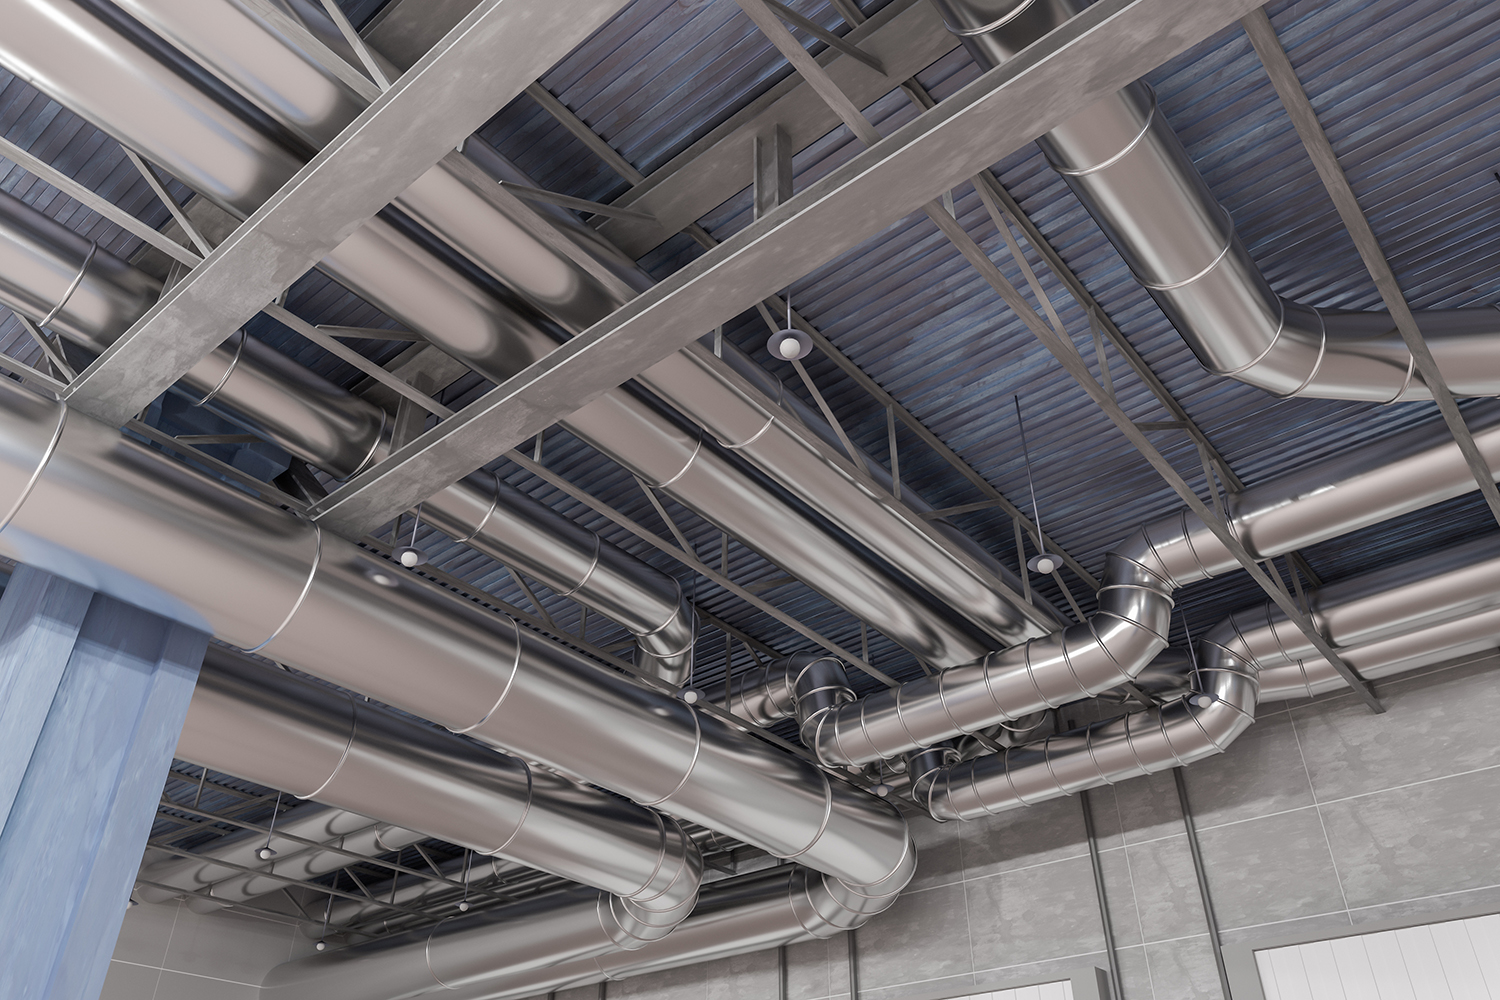 3D rendered illustration of HVAC system and pipes